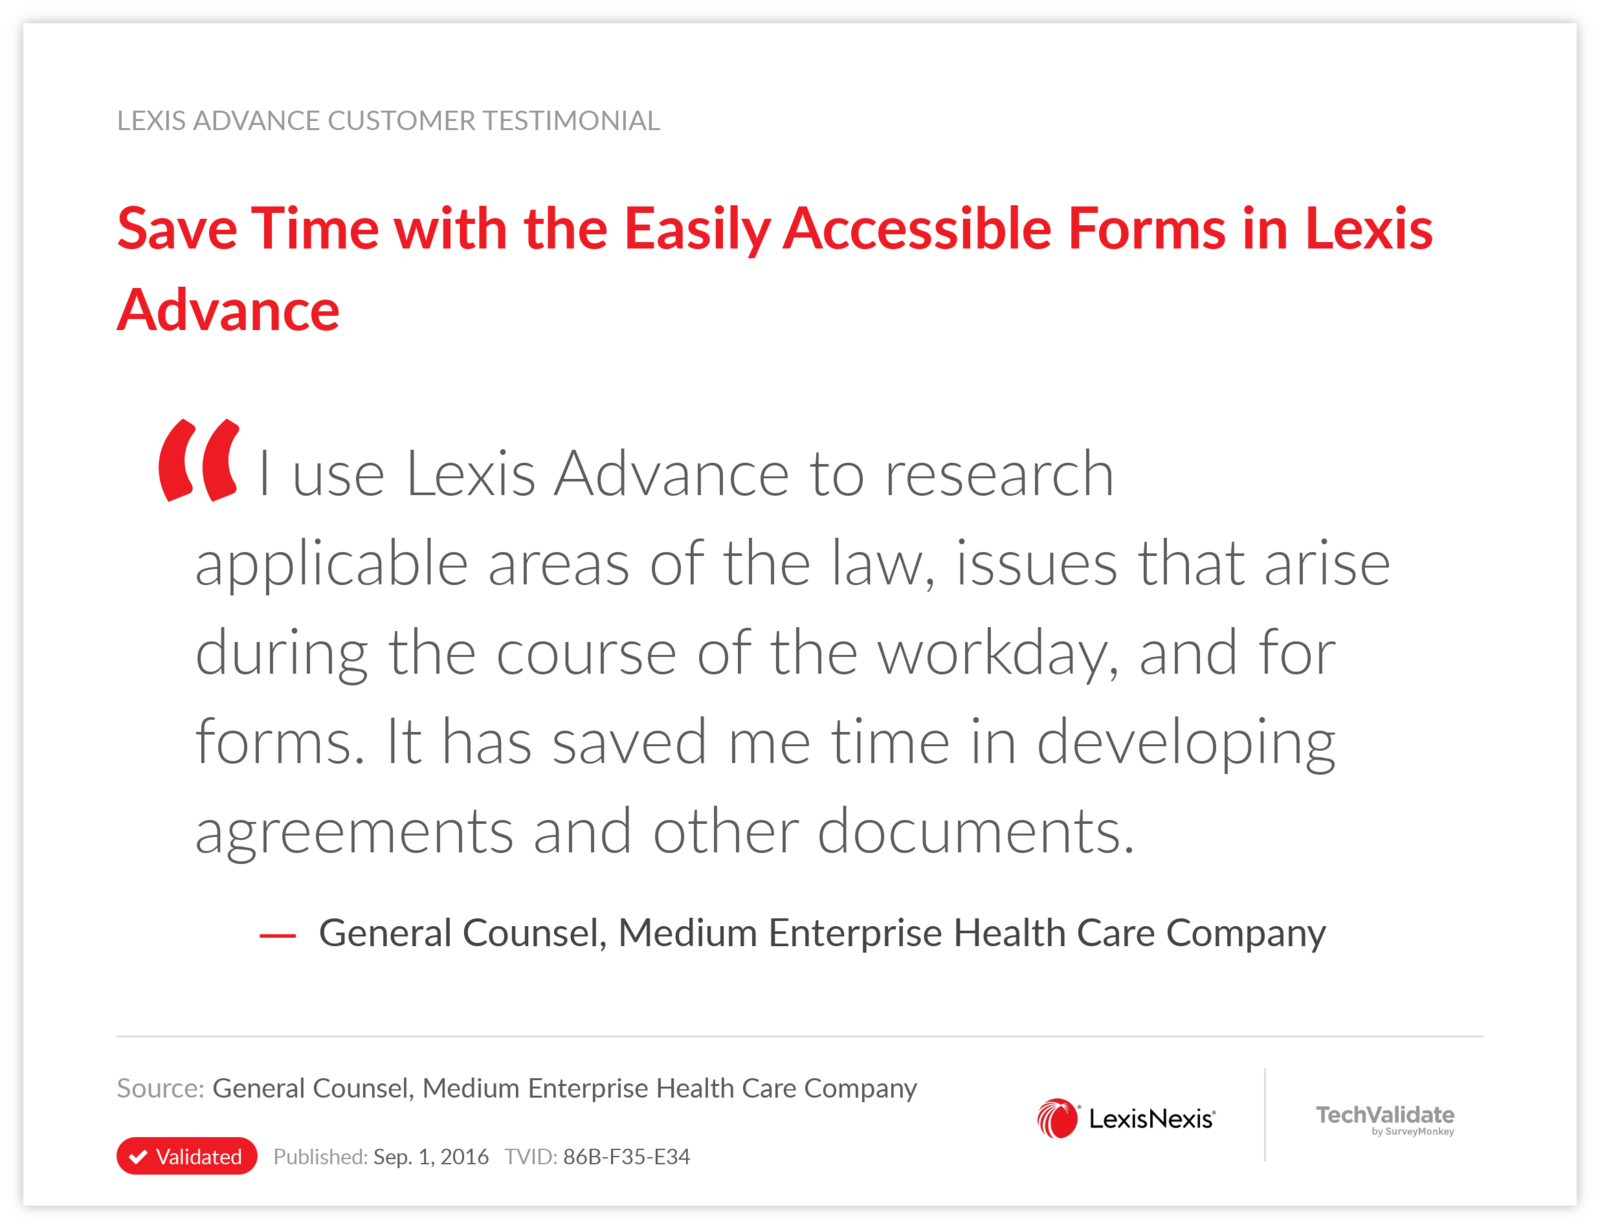 Save Time with the Easily Accessible Forms in Lexis Advance